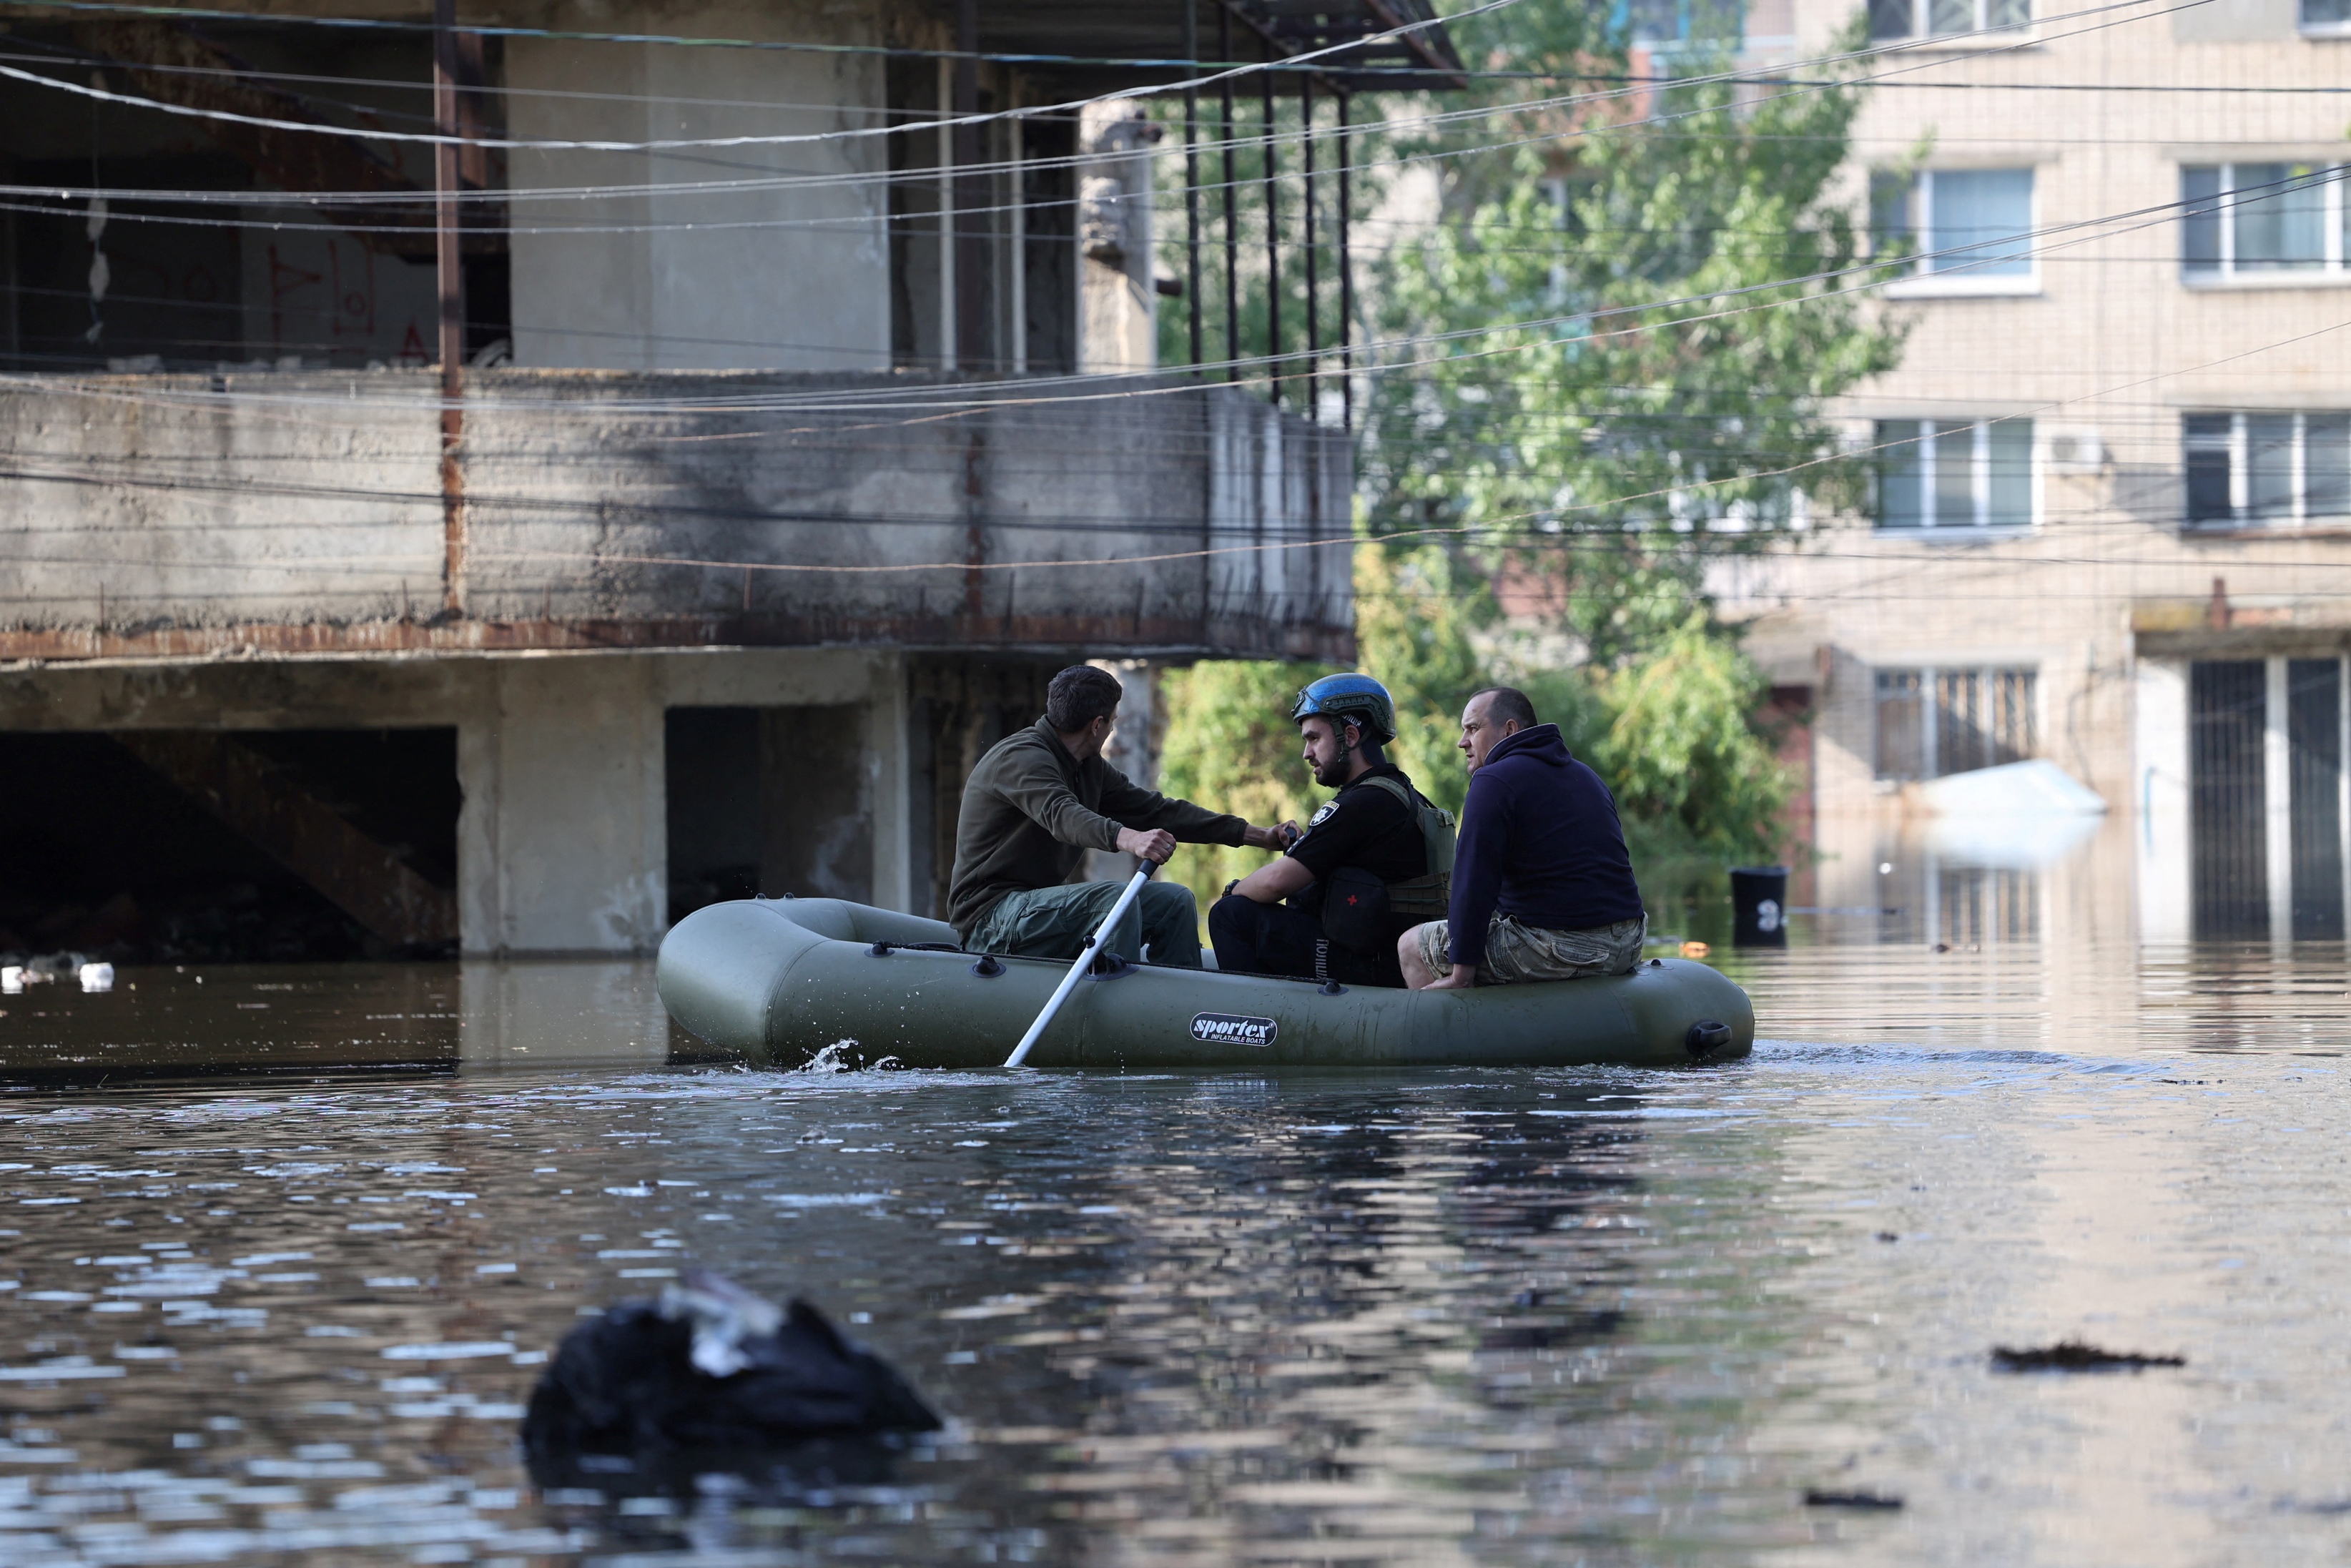 A rescue boat carrying several people out of flooded areas in Ukraine